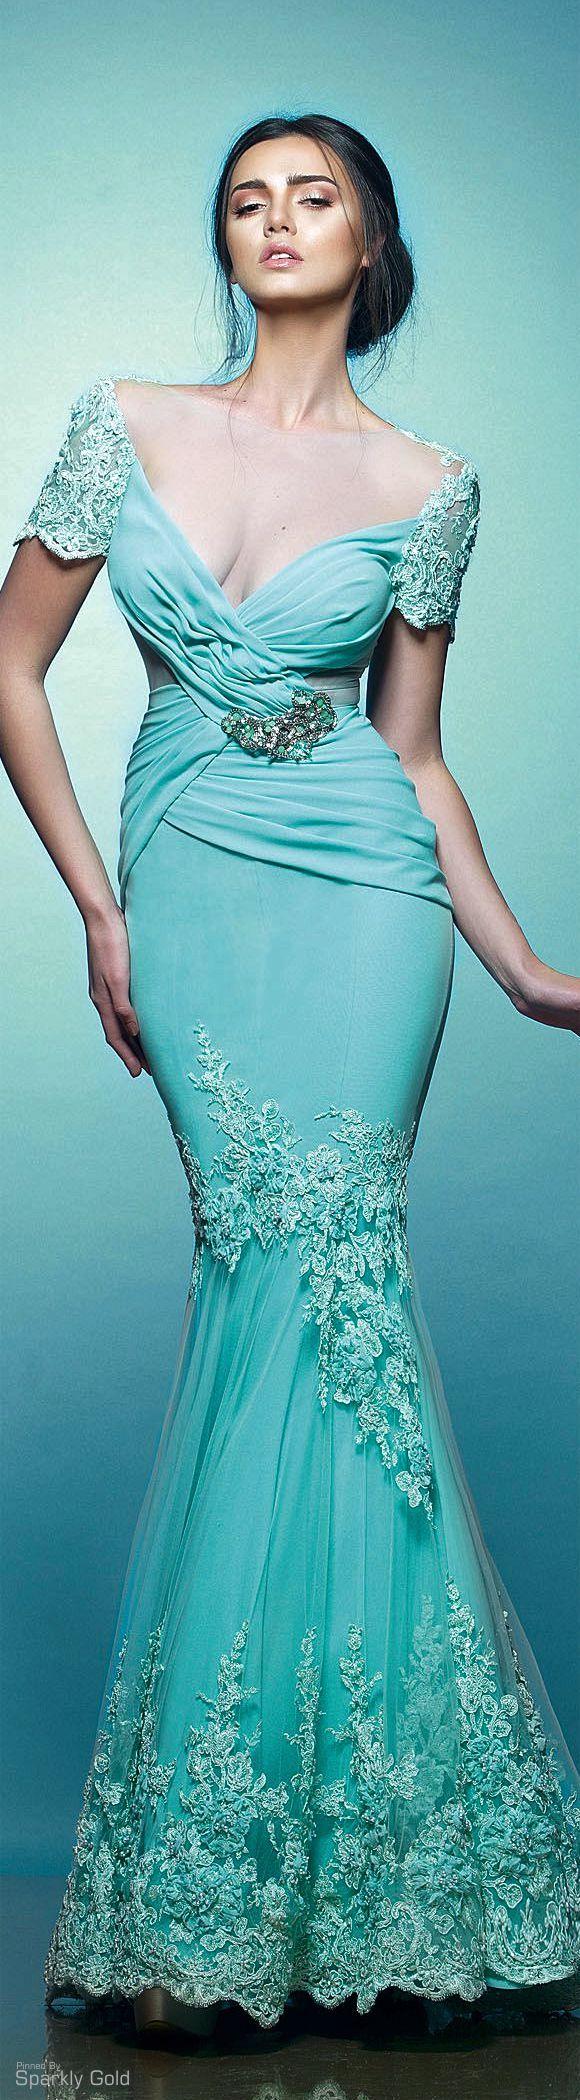 Wedding - Style: Gowns - Long/evening Dresses